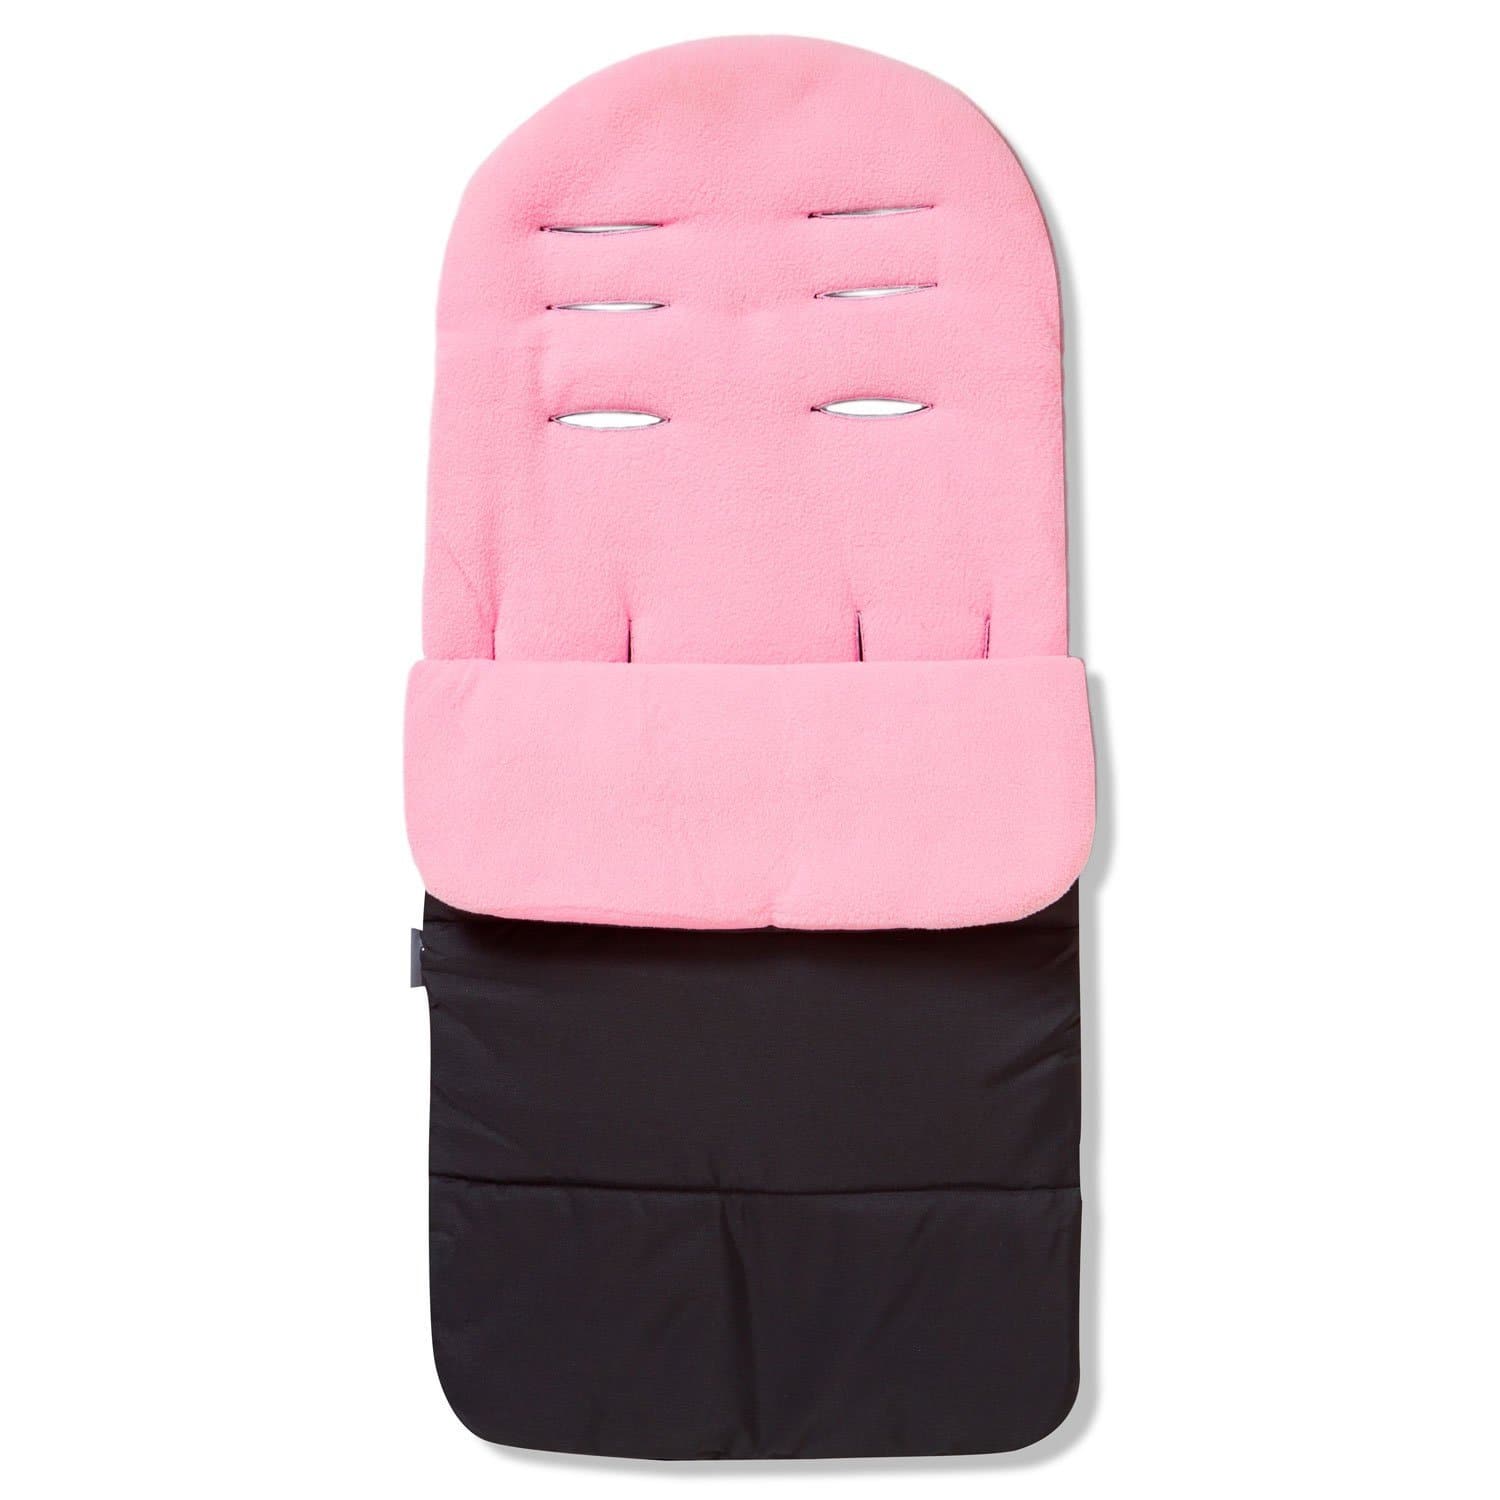 Premium Footmuff / Cosy Toes Compatible with Hauck - For Your Little One